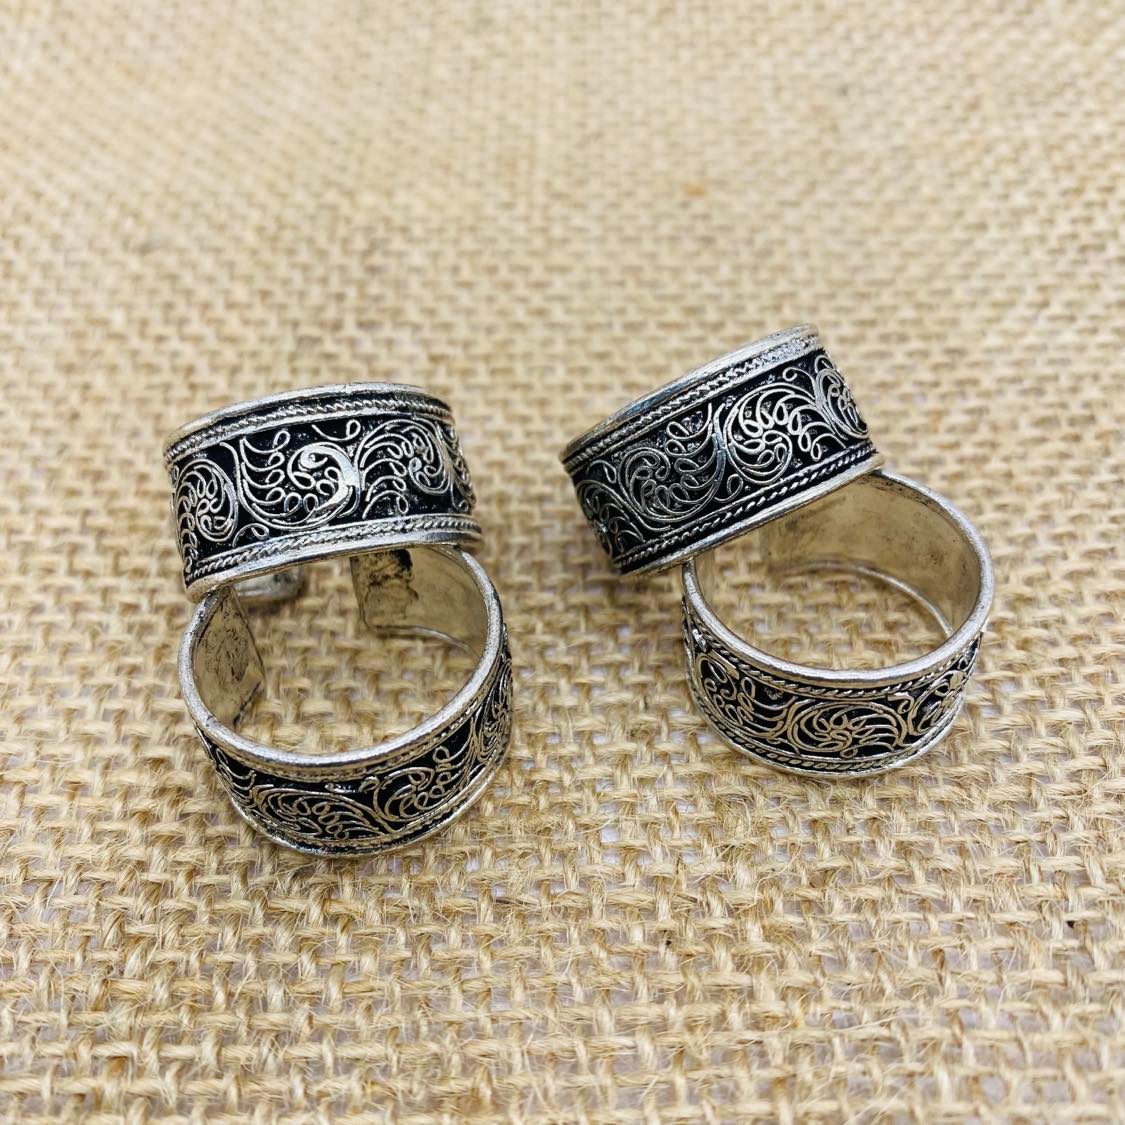 Filigree Ring, Bohemian Ring, Handmade Silver Adjustable Ring from Nepal, Unisex Band Ring, Gift for Her, Statement Ring, Hippie Ring